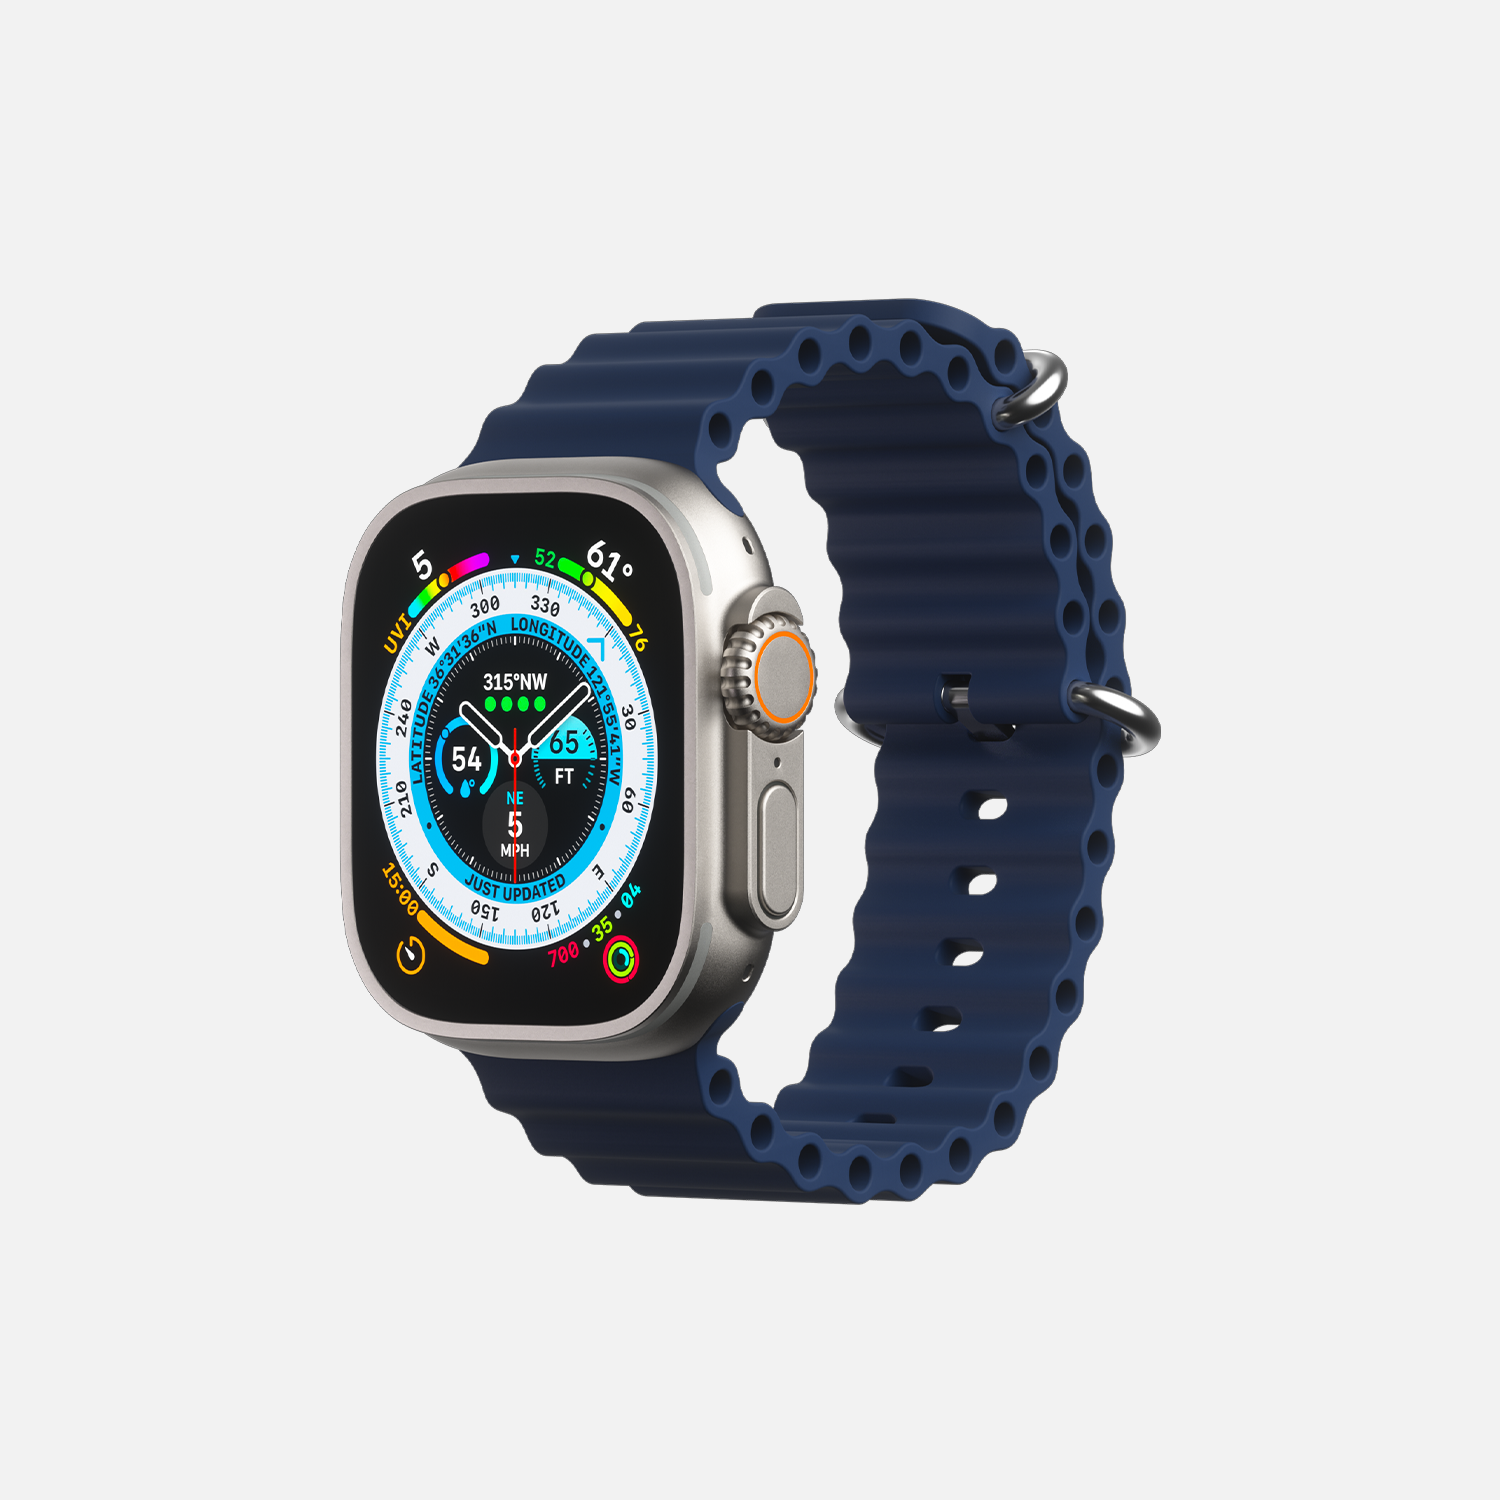 Smartwatch with blue sports band displaying fitness tracking data on a white background.